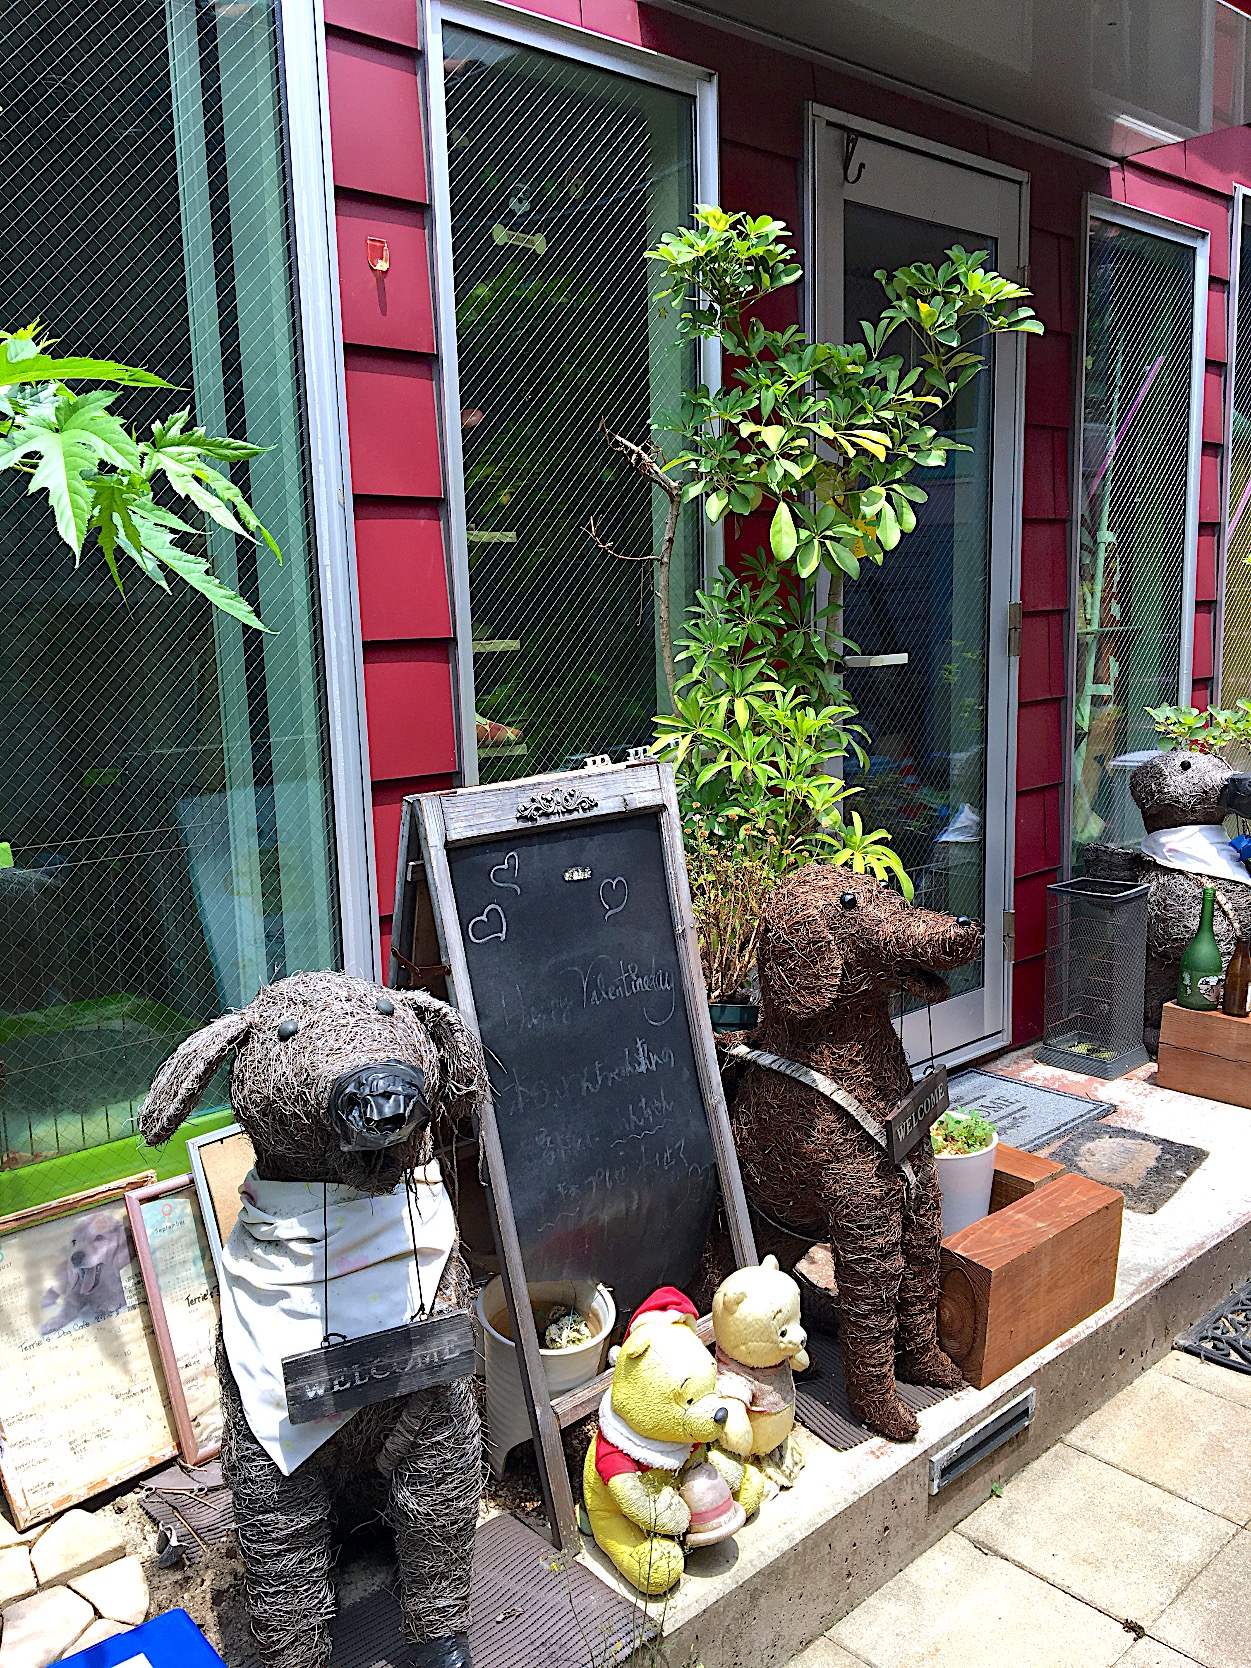 Terries’ Dog Cafe そら〜ず（テリーズ ドッグカフェ）